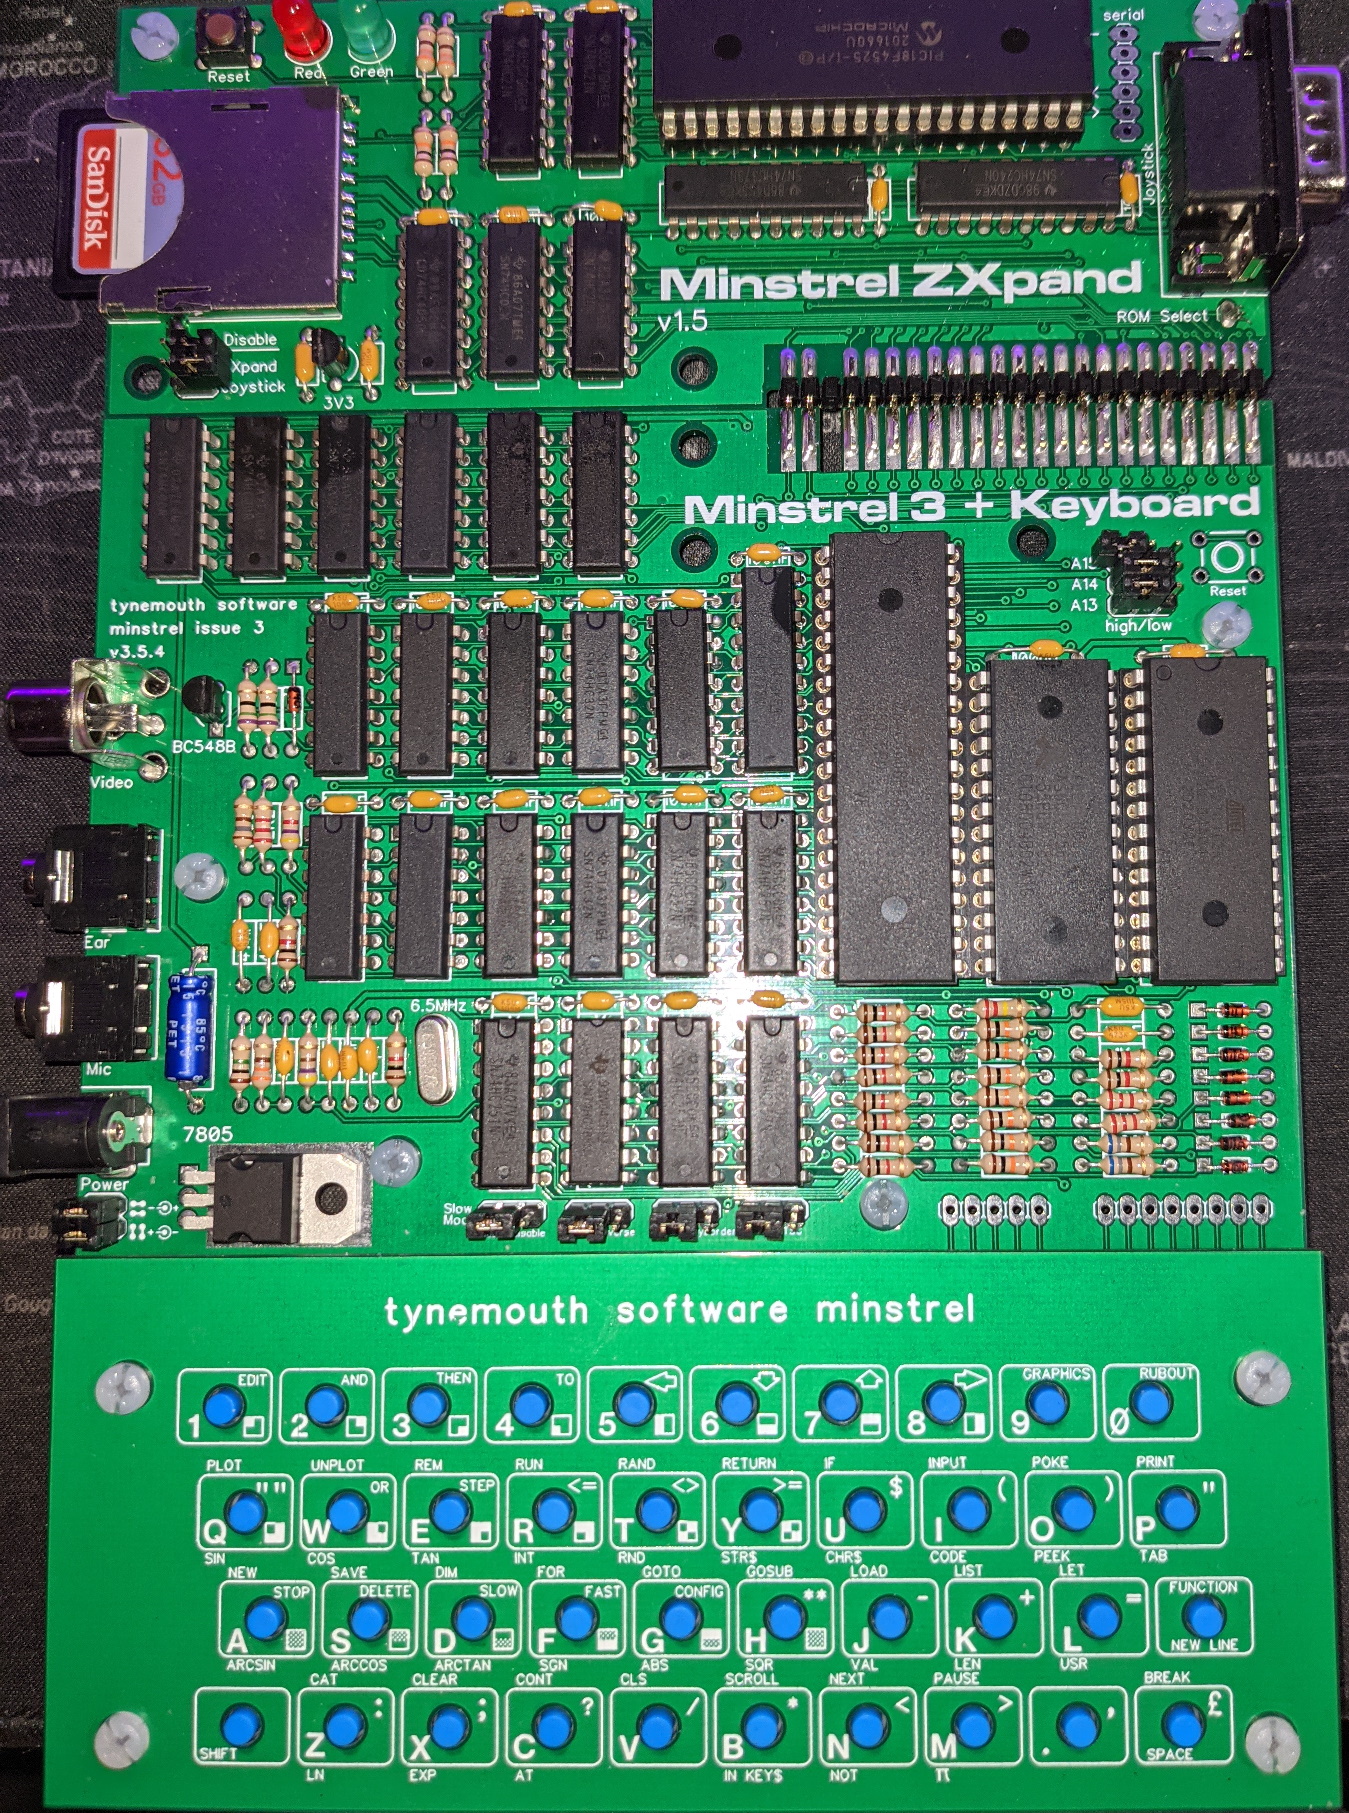 Minstrel 3 with ZXpand and keyboard